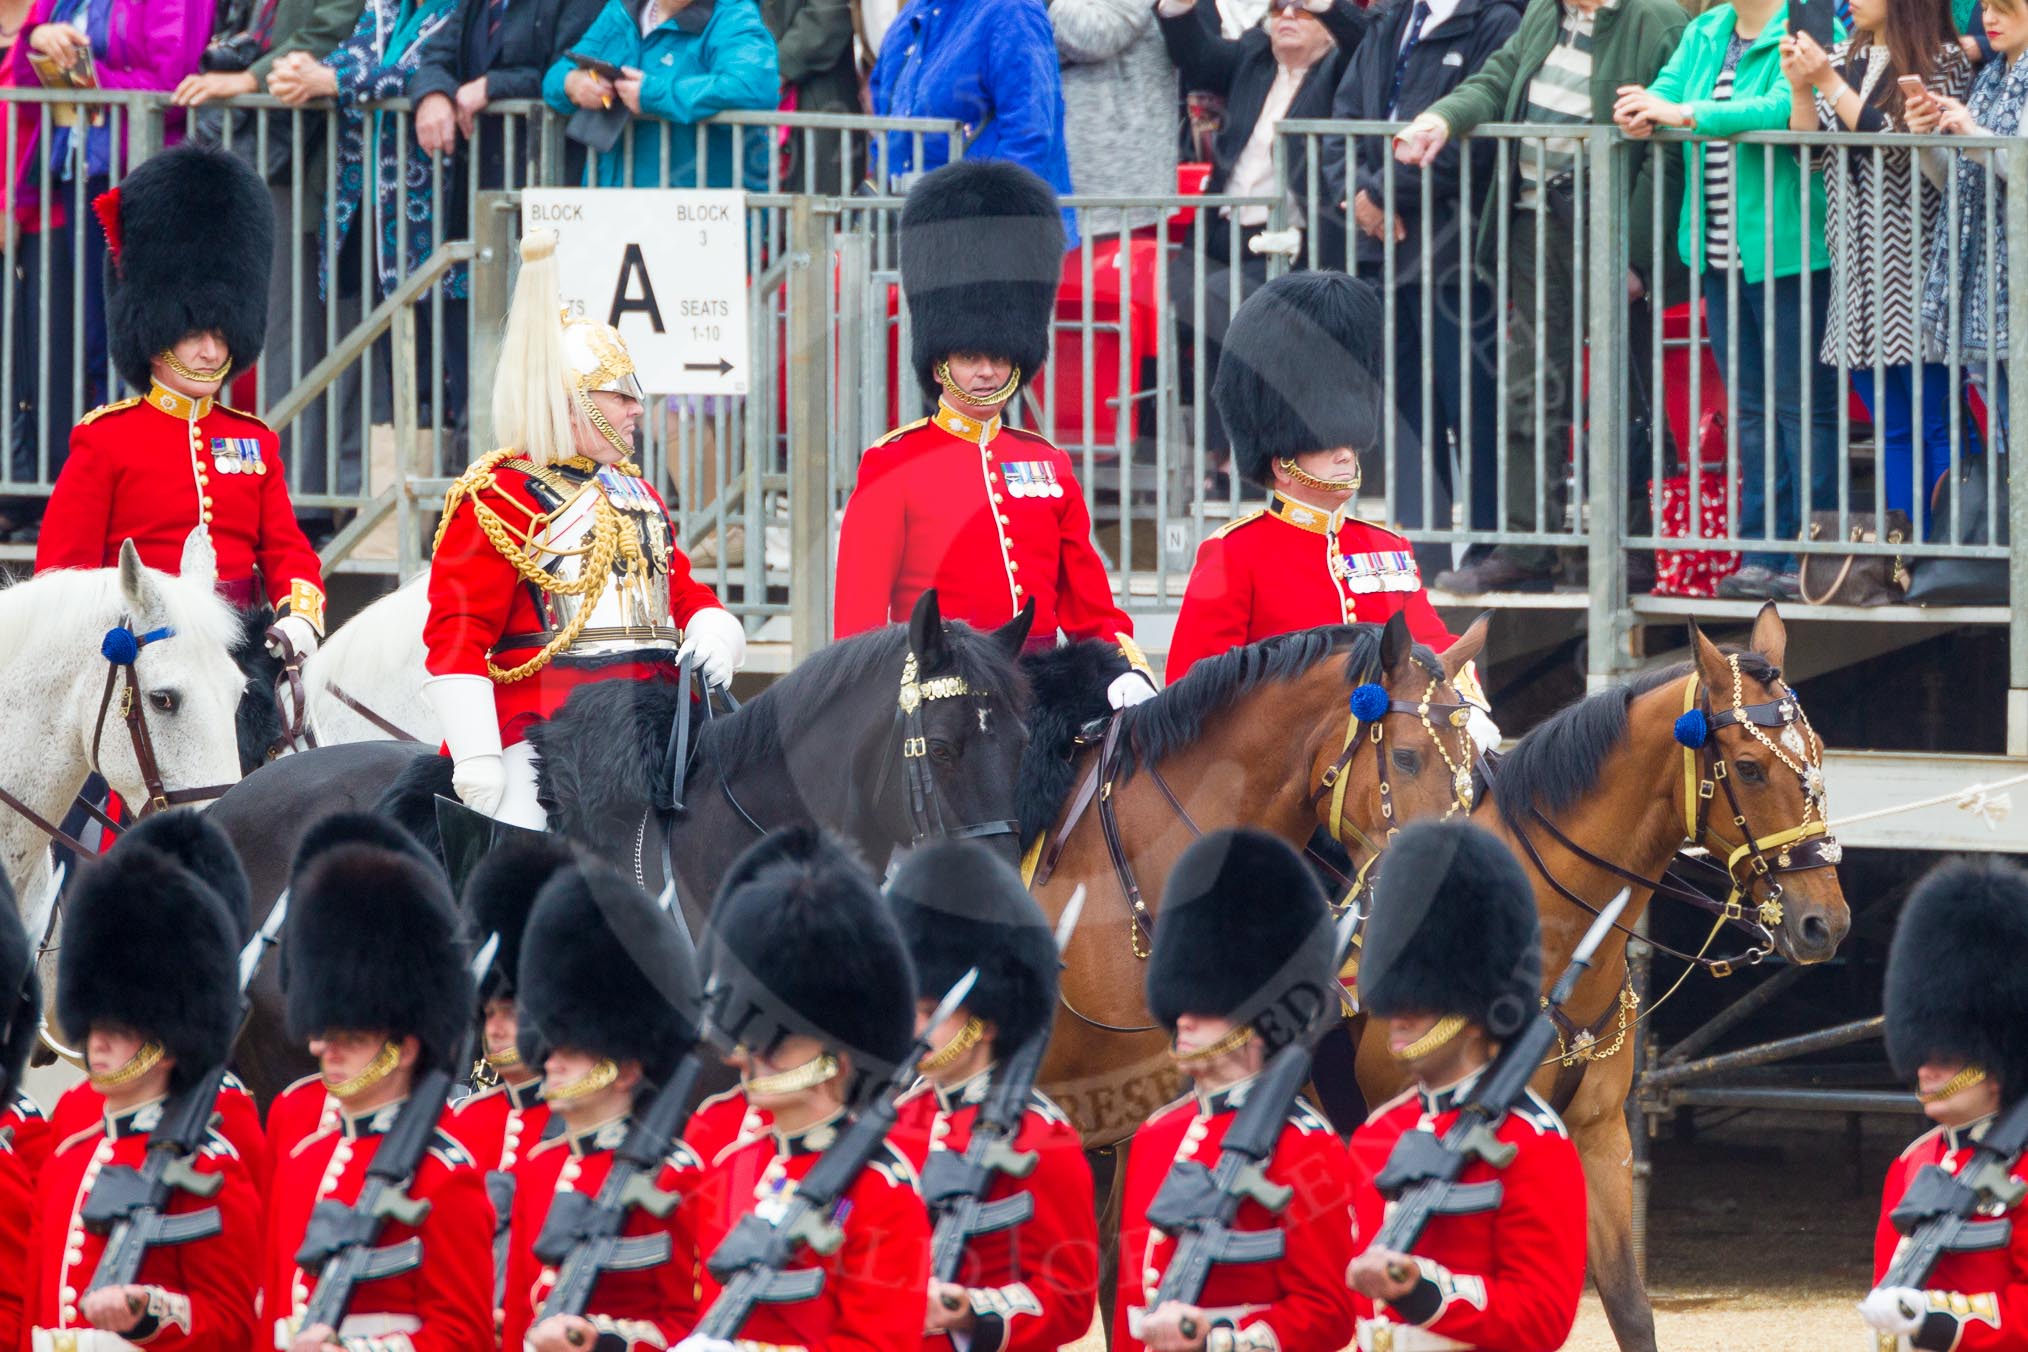 The Colonel's Review 2016.
Horse Guards Parade, Westminster,
London,

United Kingdom,
on 04 June 2016 at 10:59, image #164